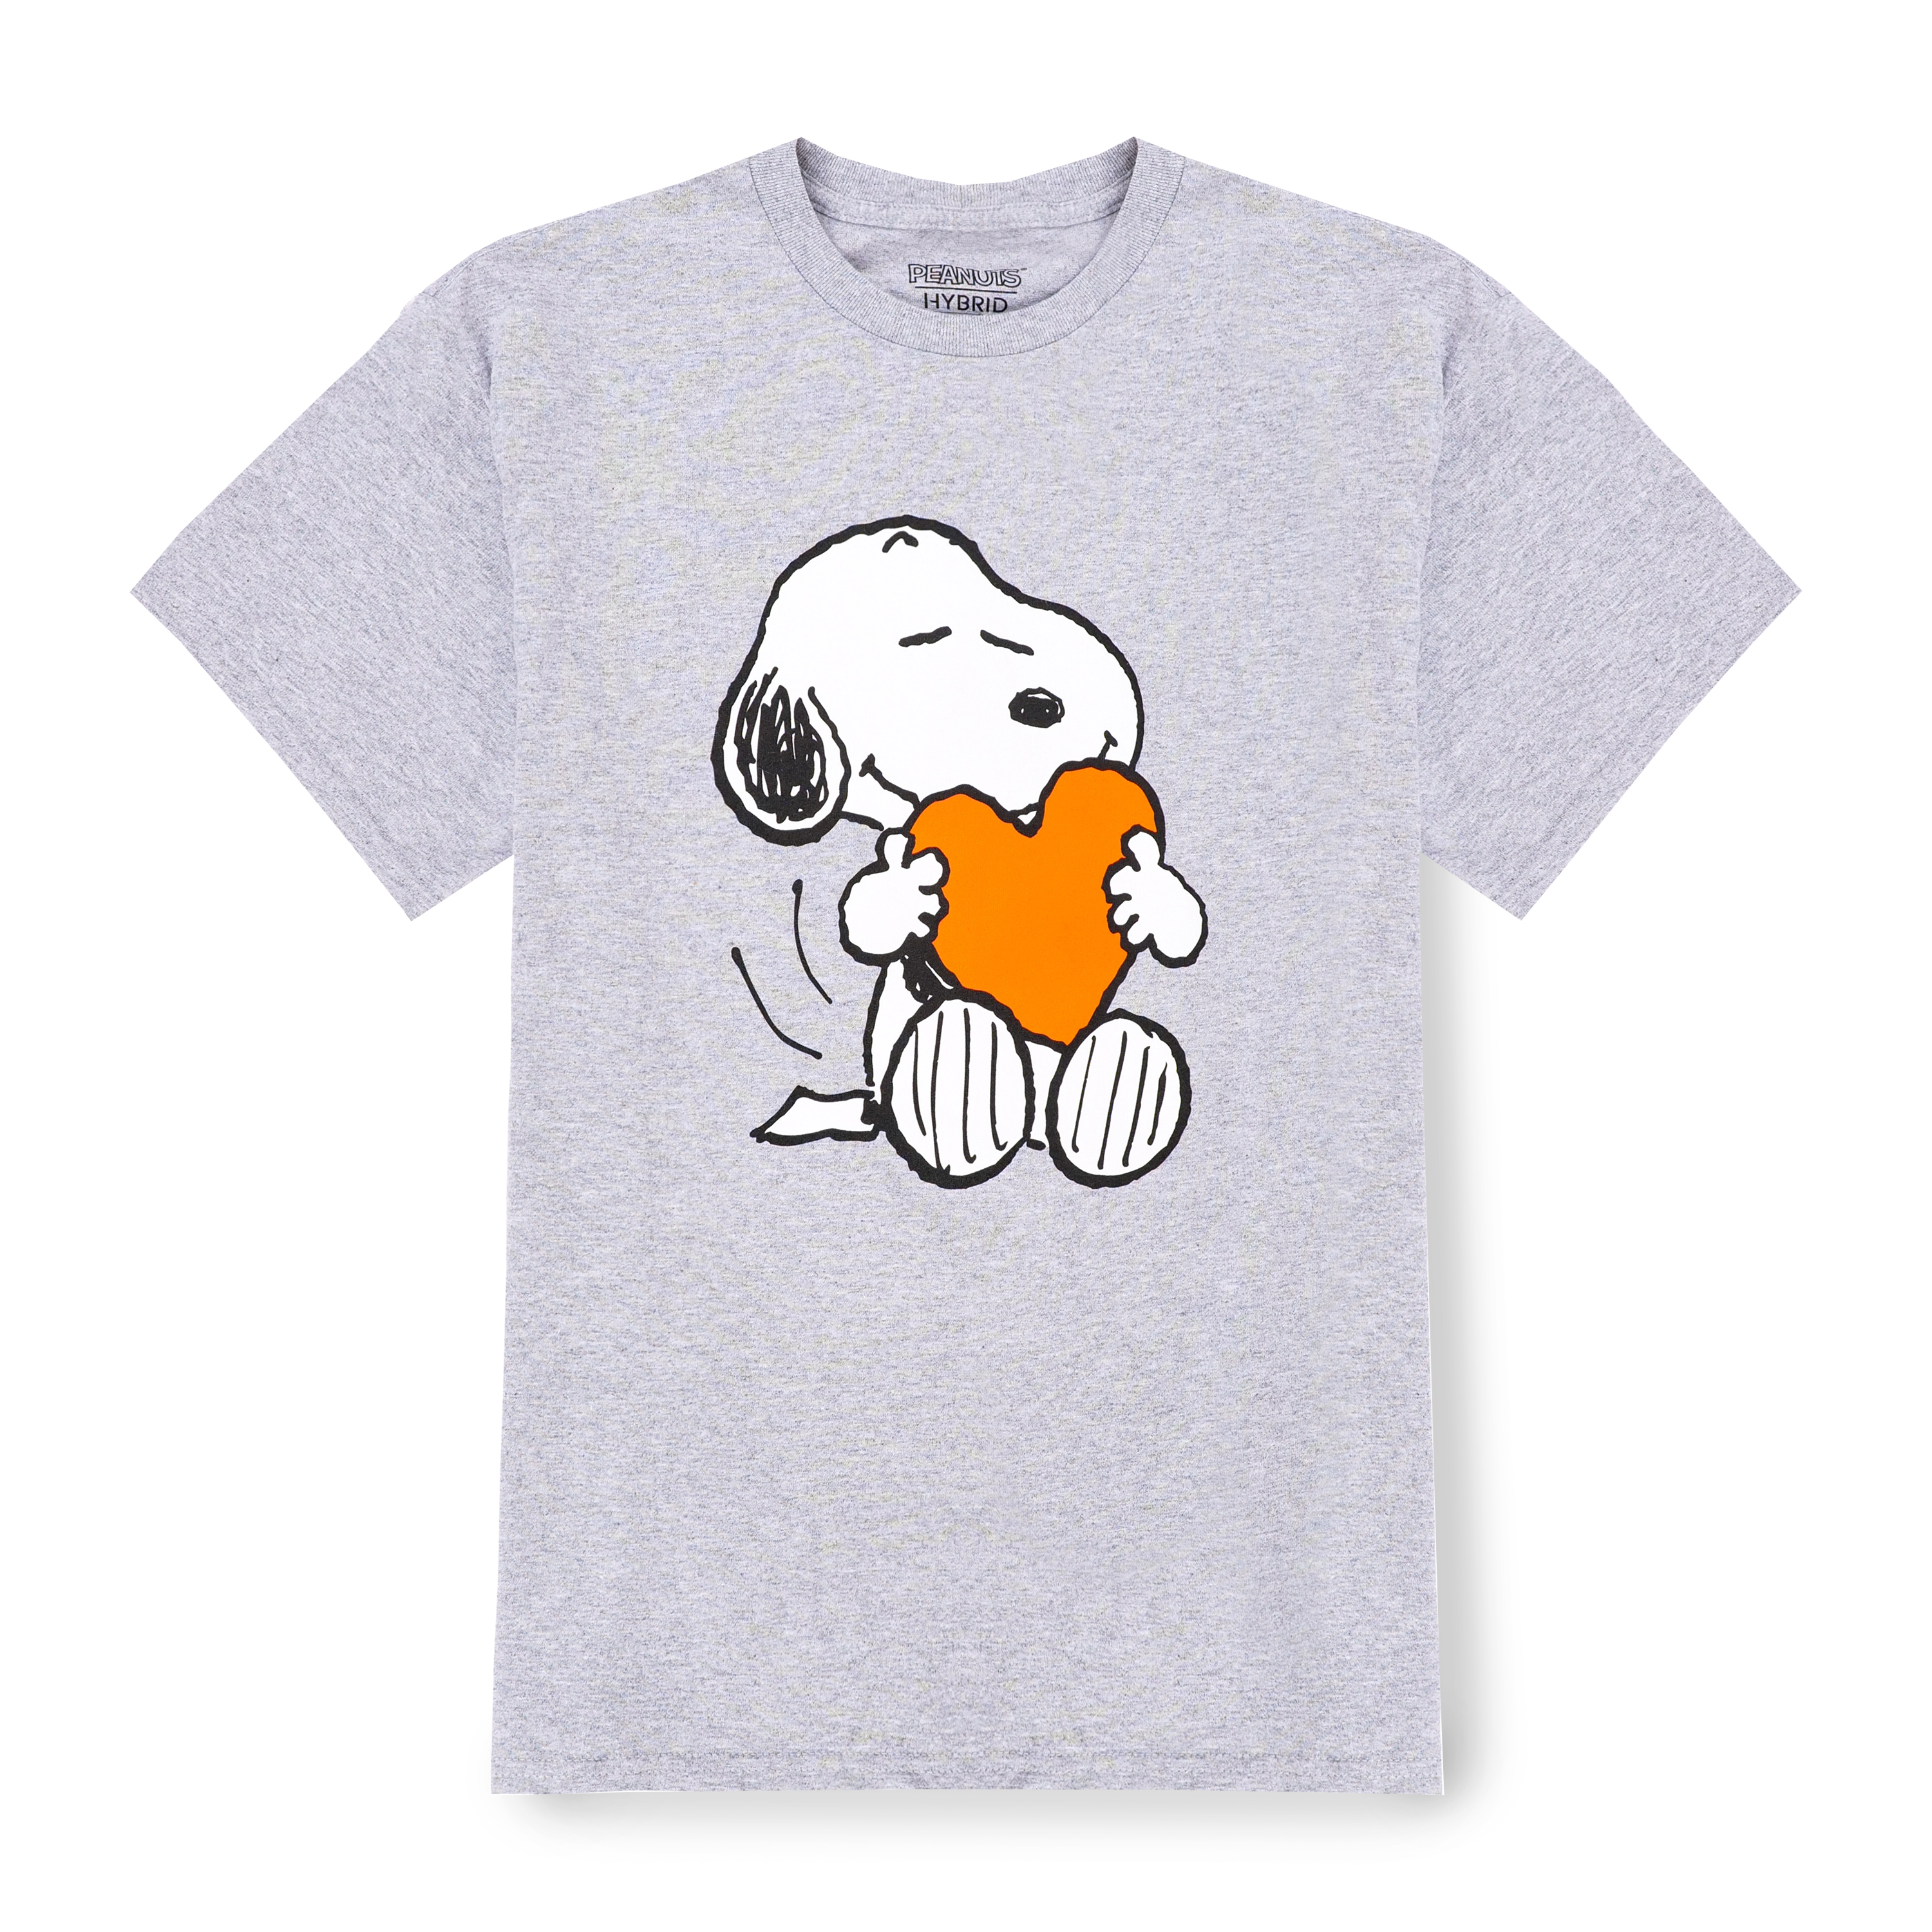 The Official Peanuts Merchandise Store – The Peanuts Store